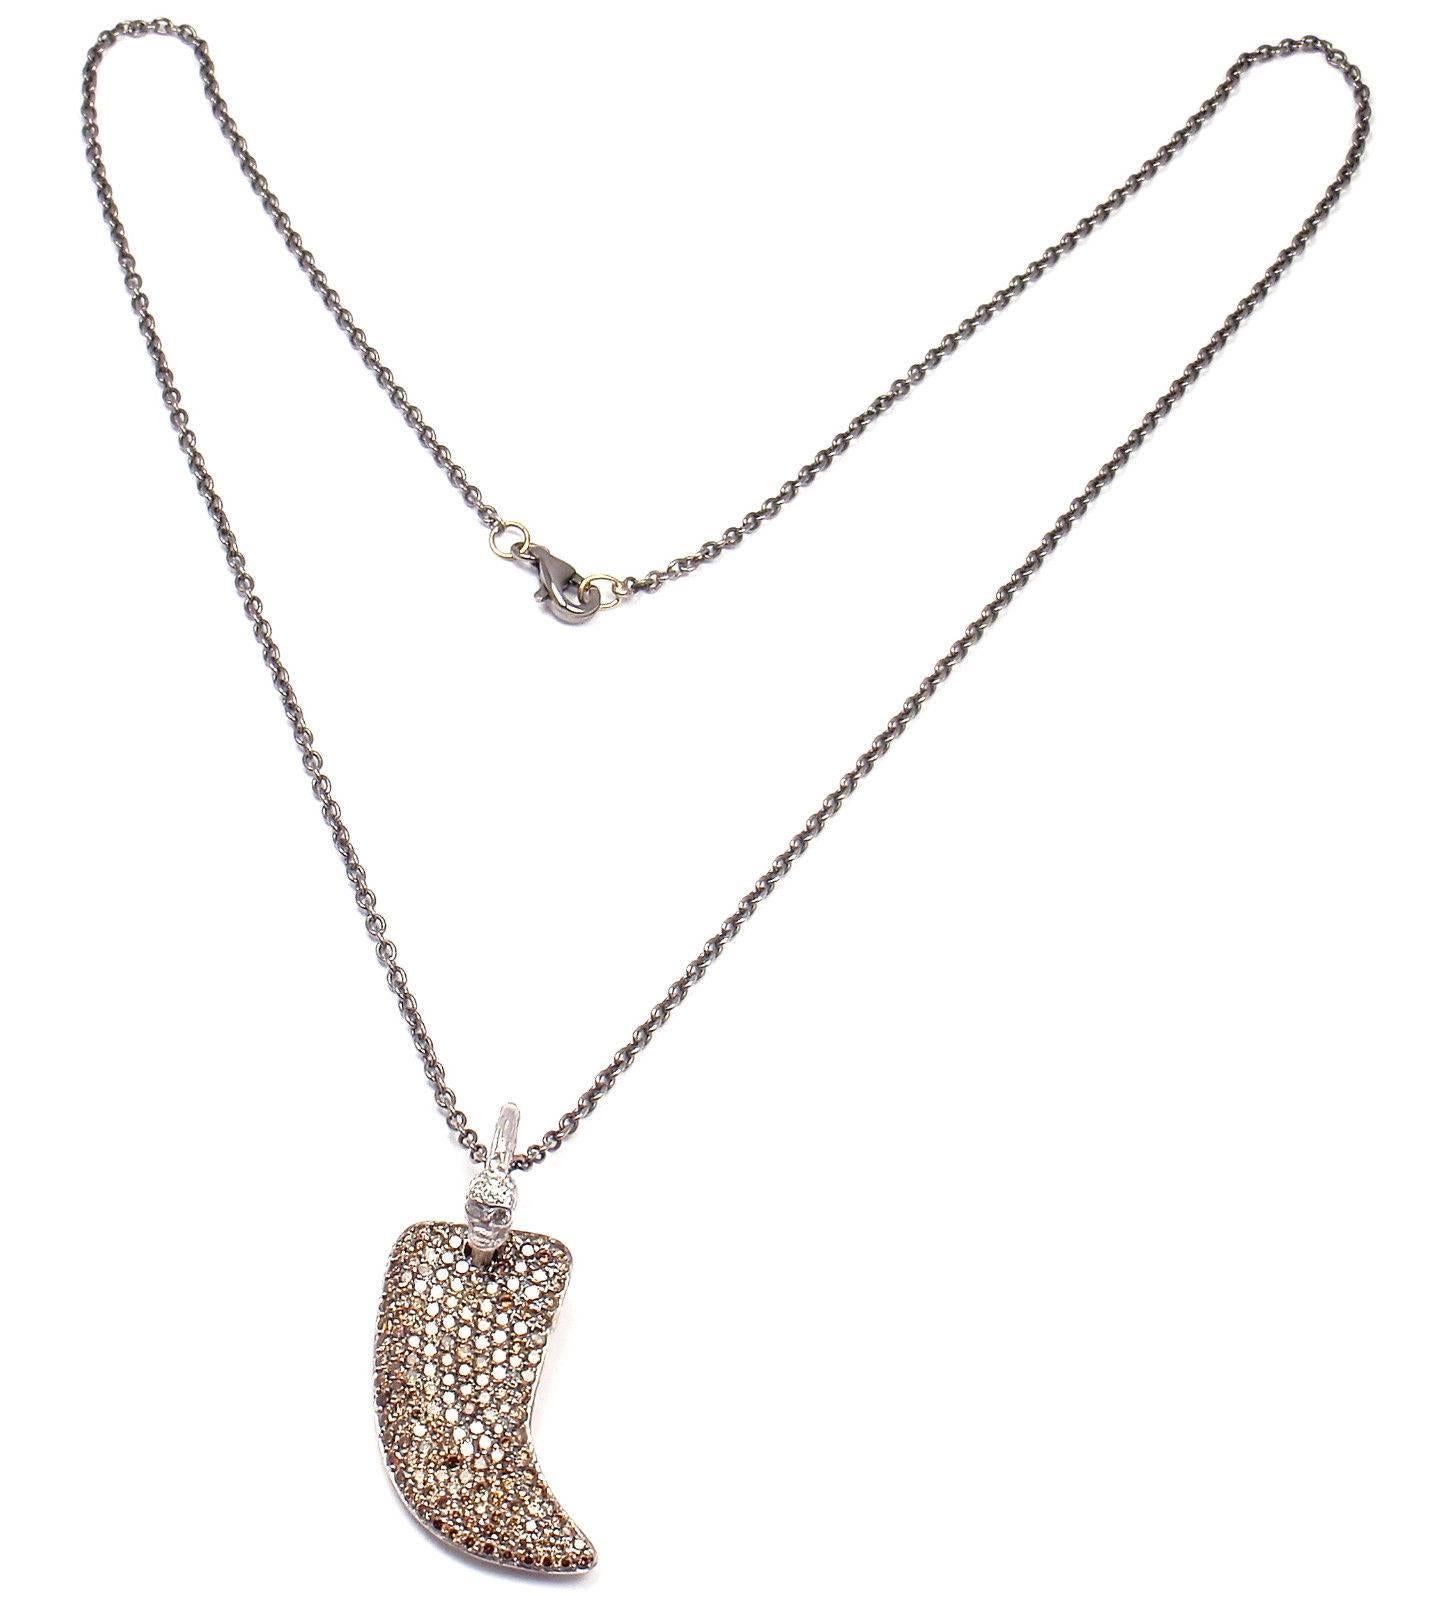 18k White Gold Color Diamond Large Claw Pendant Necklace by Loree Rodkin. 
With Colored round diamonds total weight approx. 1.85ct
This This necklace used to belong to Jackie Collins and was 
purchased from her jewelry estate collection.

Details: